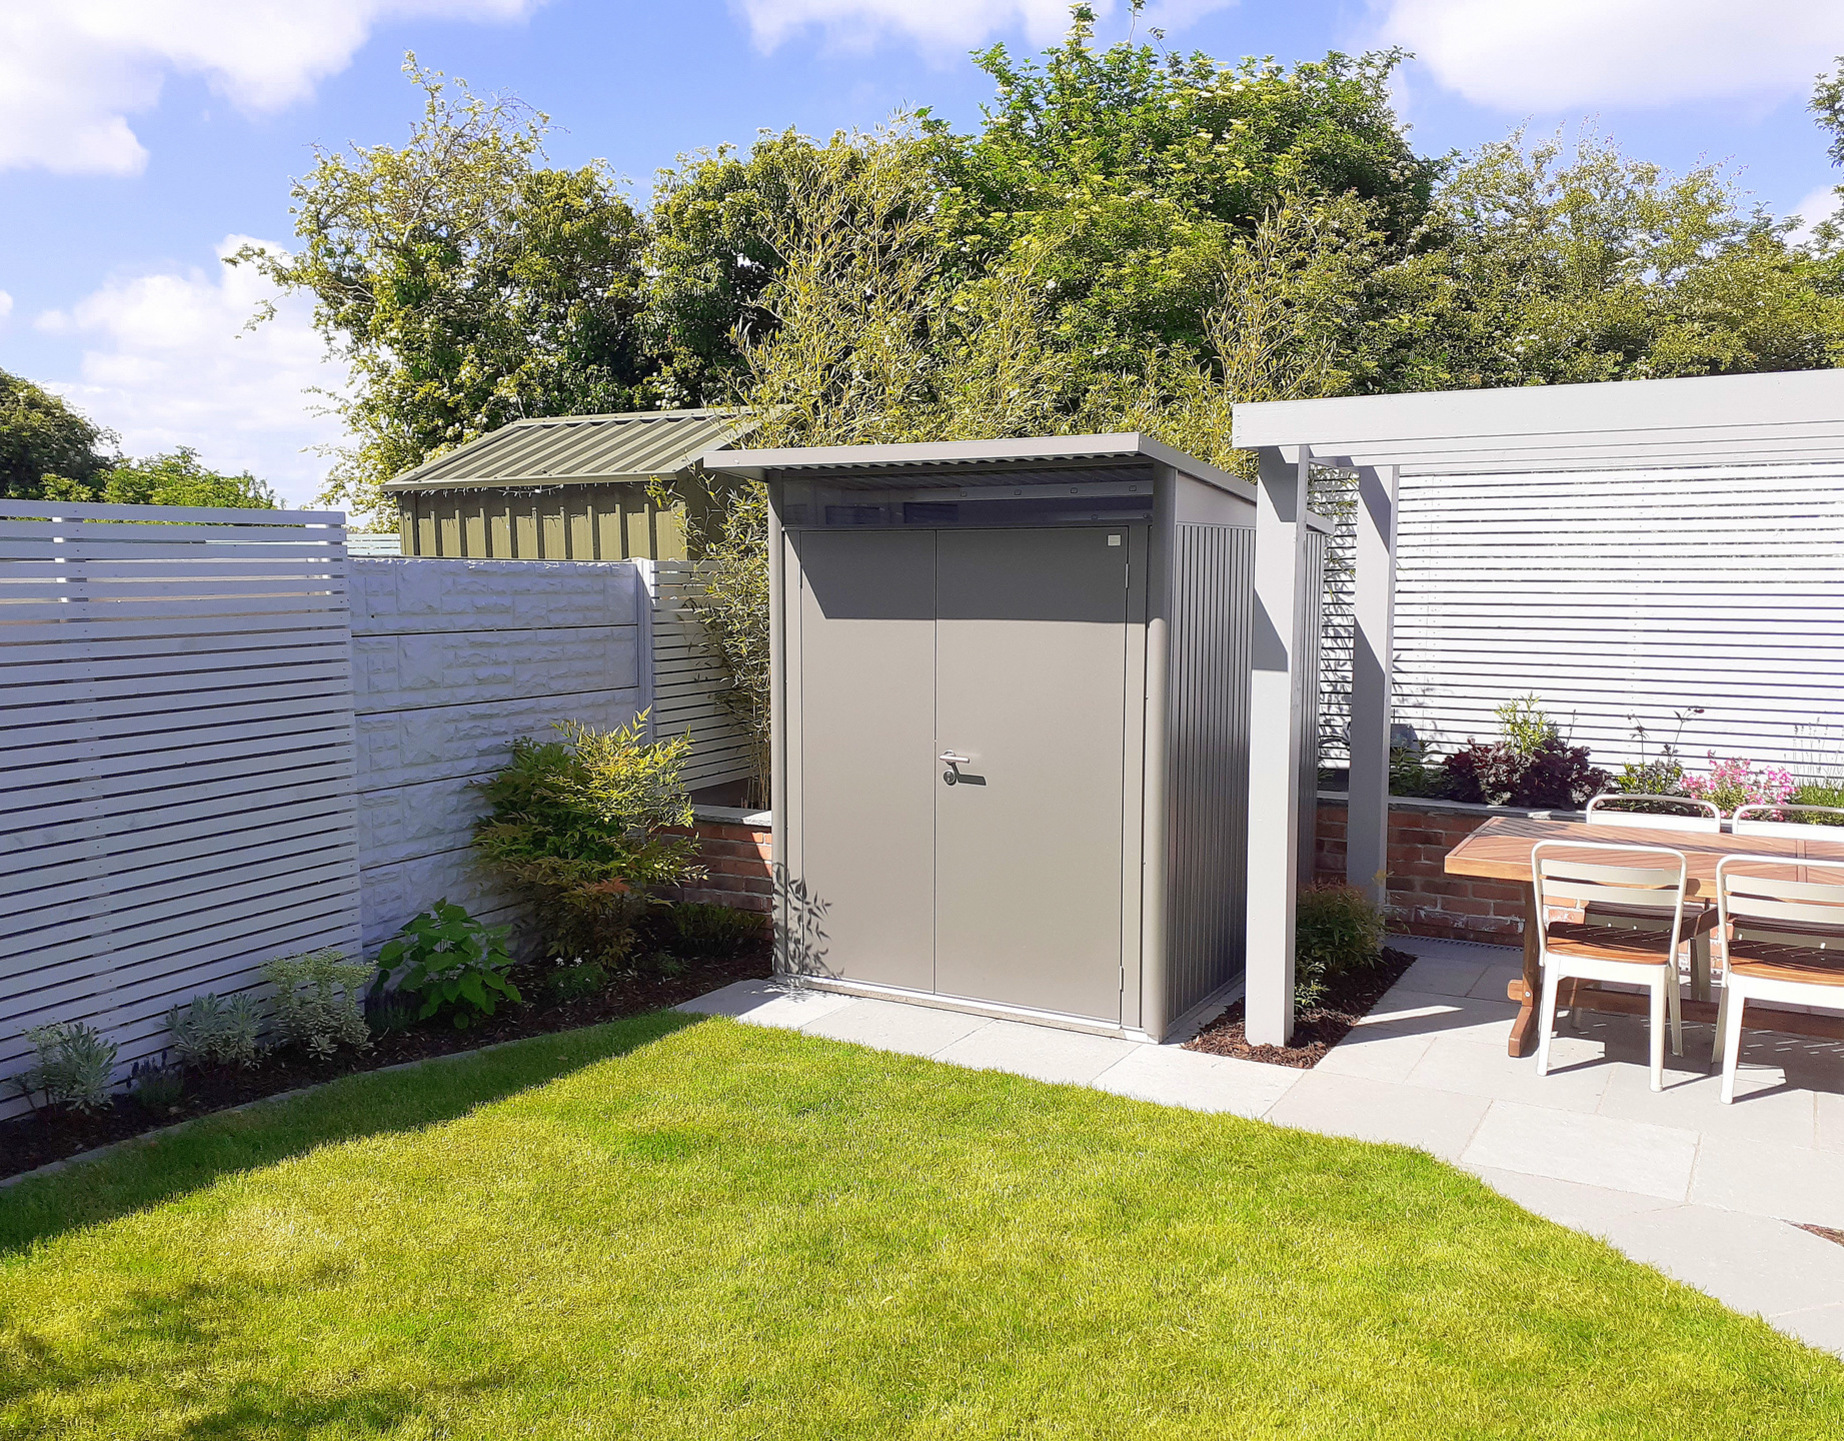 Biohort AvantGarde A2 in metallic quartz grey with optional accessories including double doors, aluminium floor frame & aluminium floor panels | Supplied + Fitted in Ashbourne, by Owen Chubb Landscapers, Tel 087-2306 128